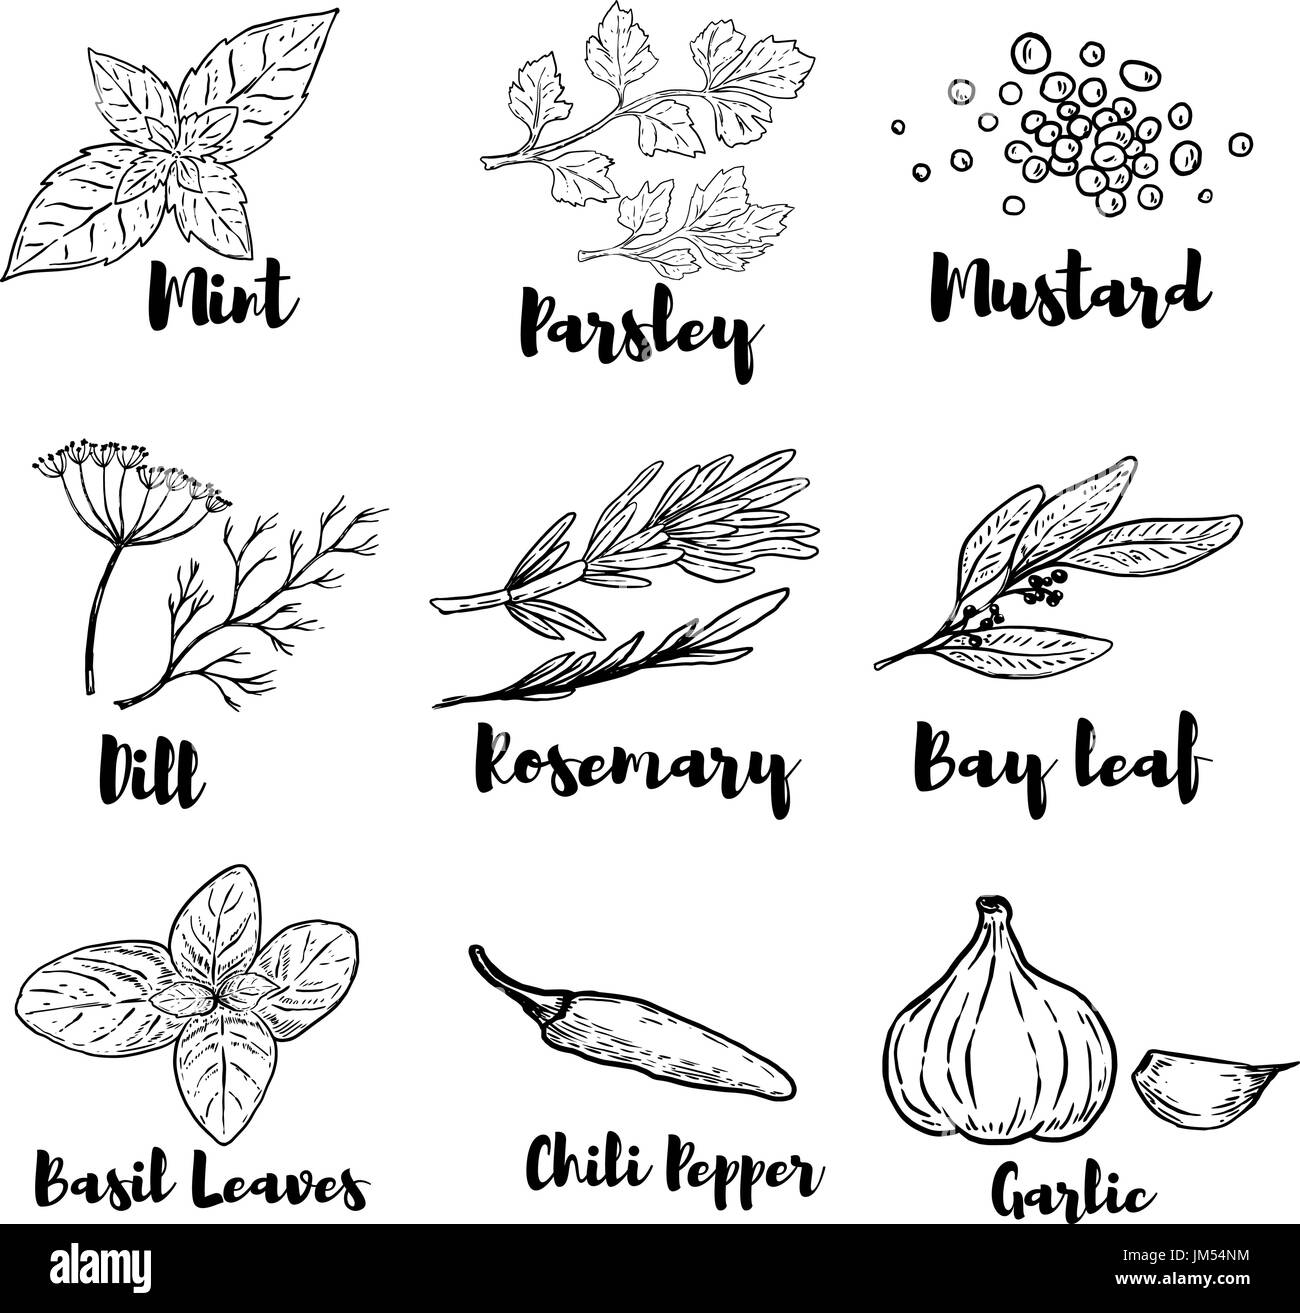 Set of spice and herbs illustrations isolated on white background. Design elements for poster, menu. Vector illustration Stock Vector